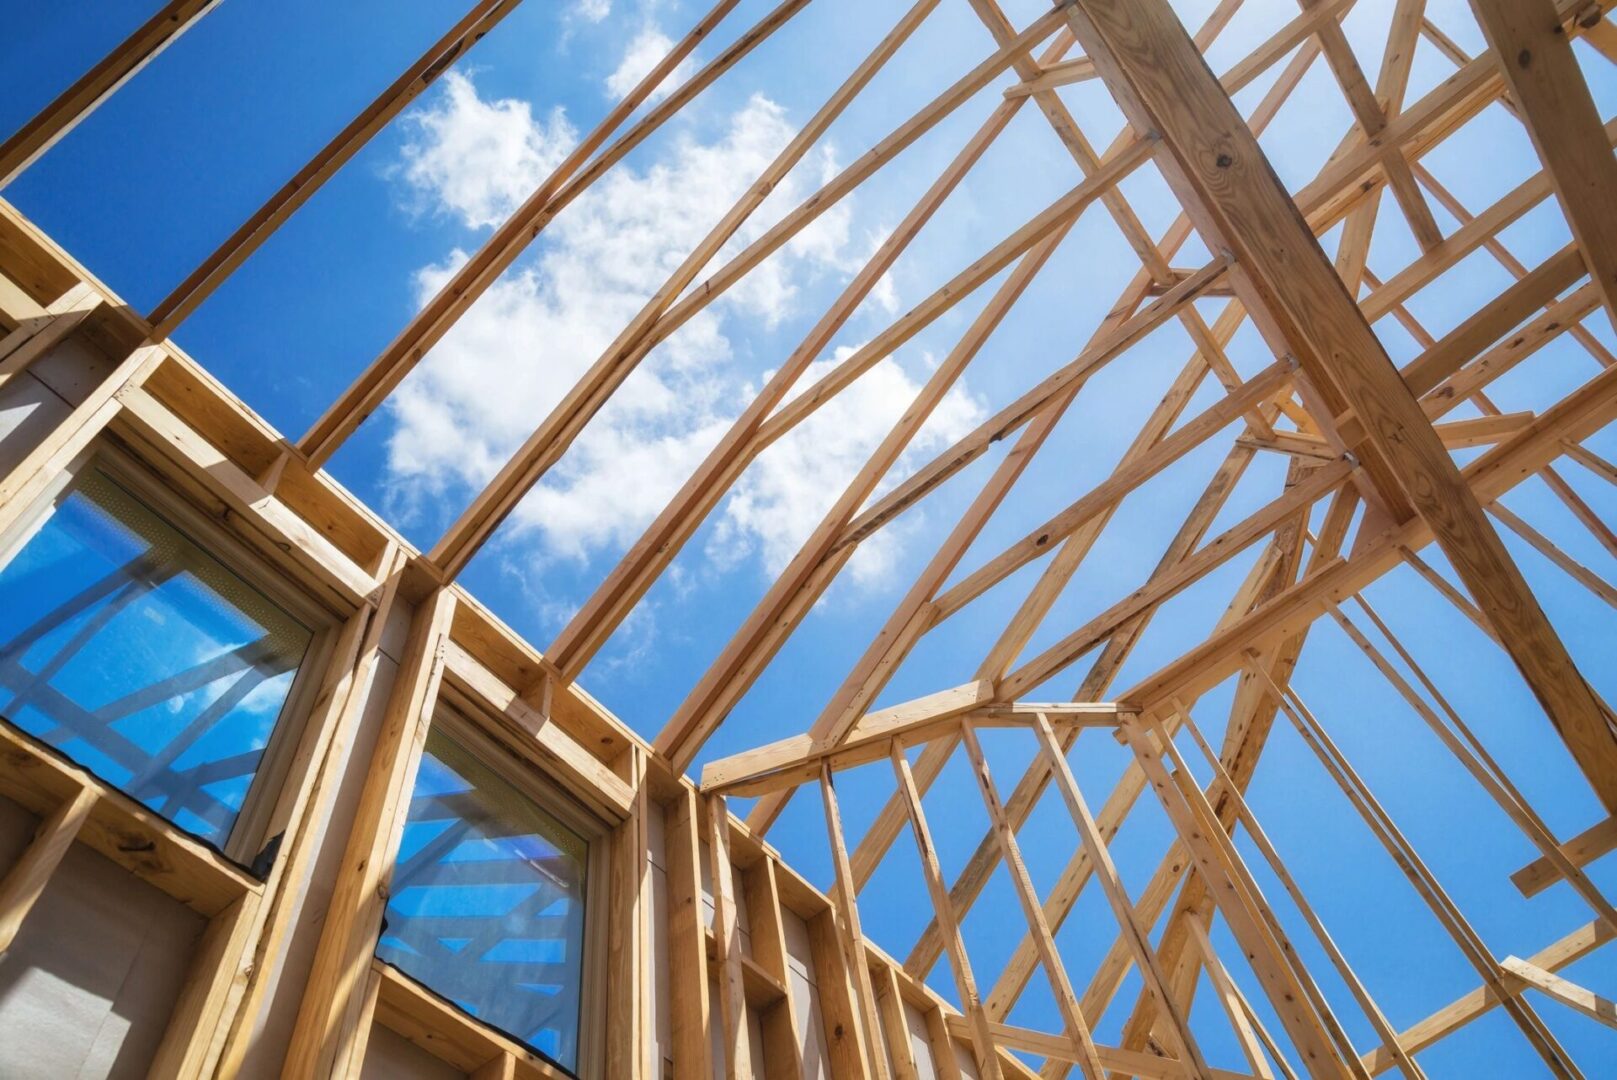 A wooden structure under construction with blue sky in the background.